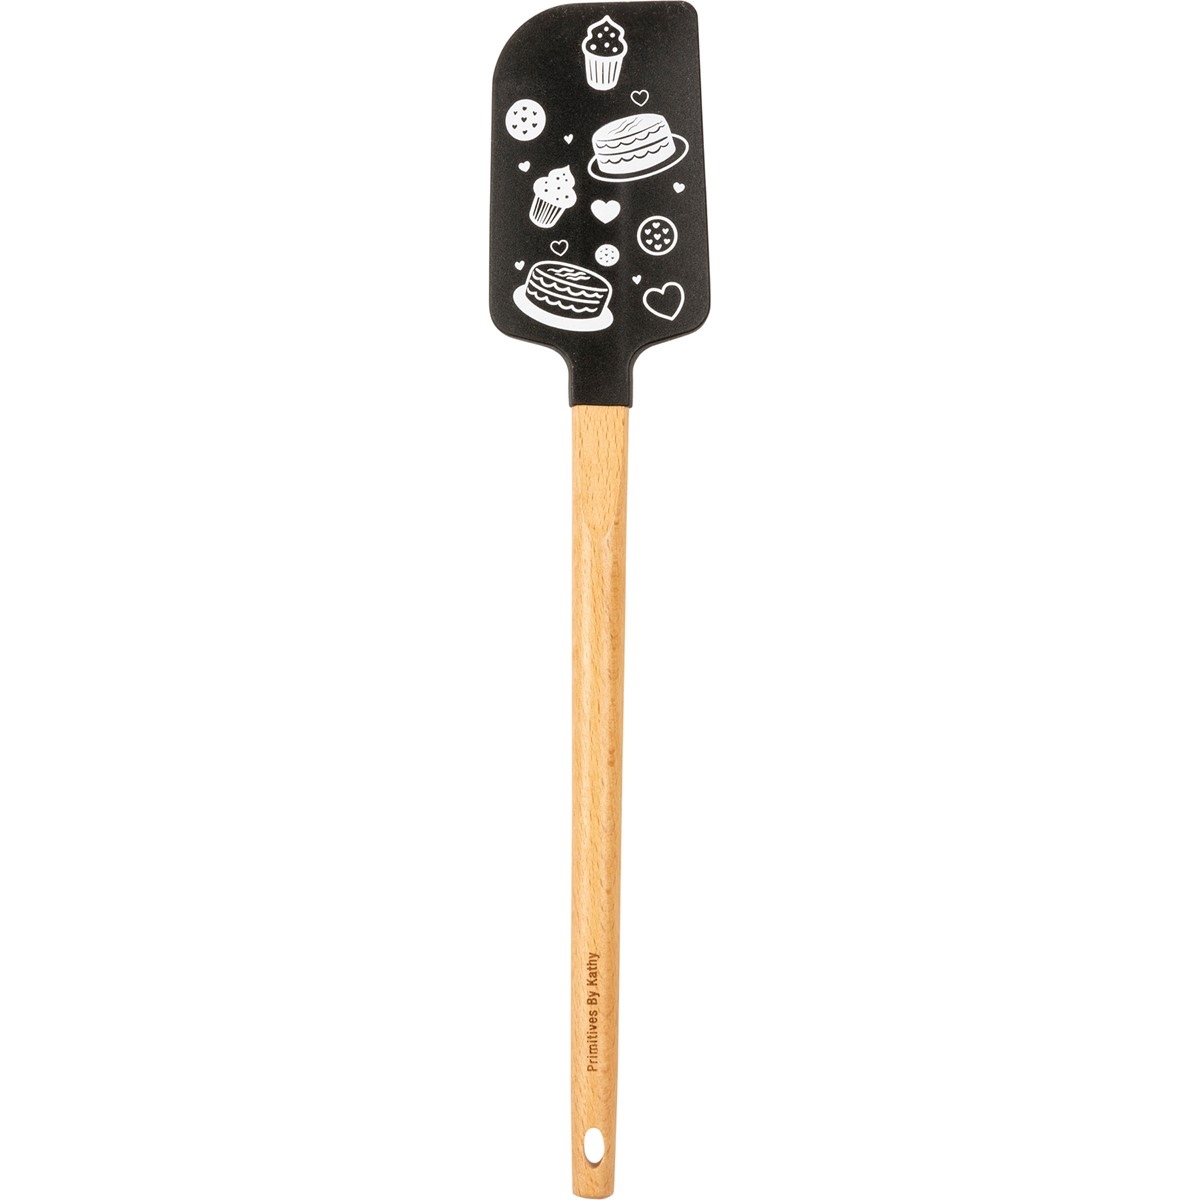 Spatula - Baking Is Love Made Edible - 2.50" x 13" x 0.50" - Silicone, Wood